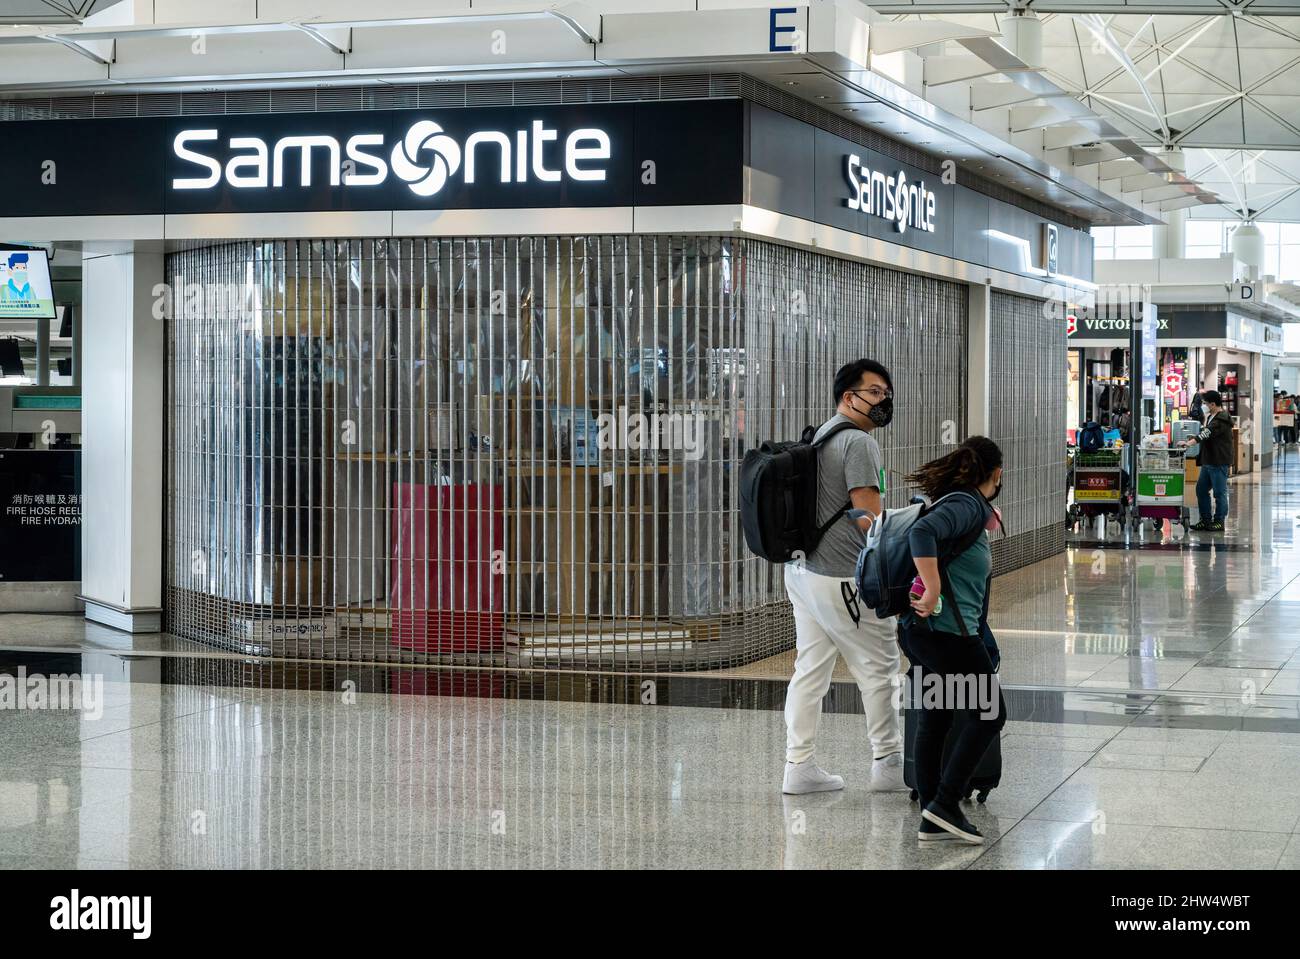 Samsonite Sign High Resolution Stock Photography and Images - Alamy